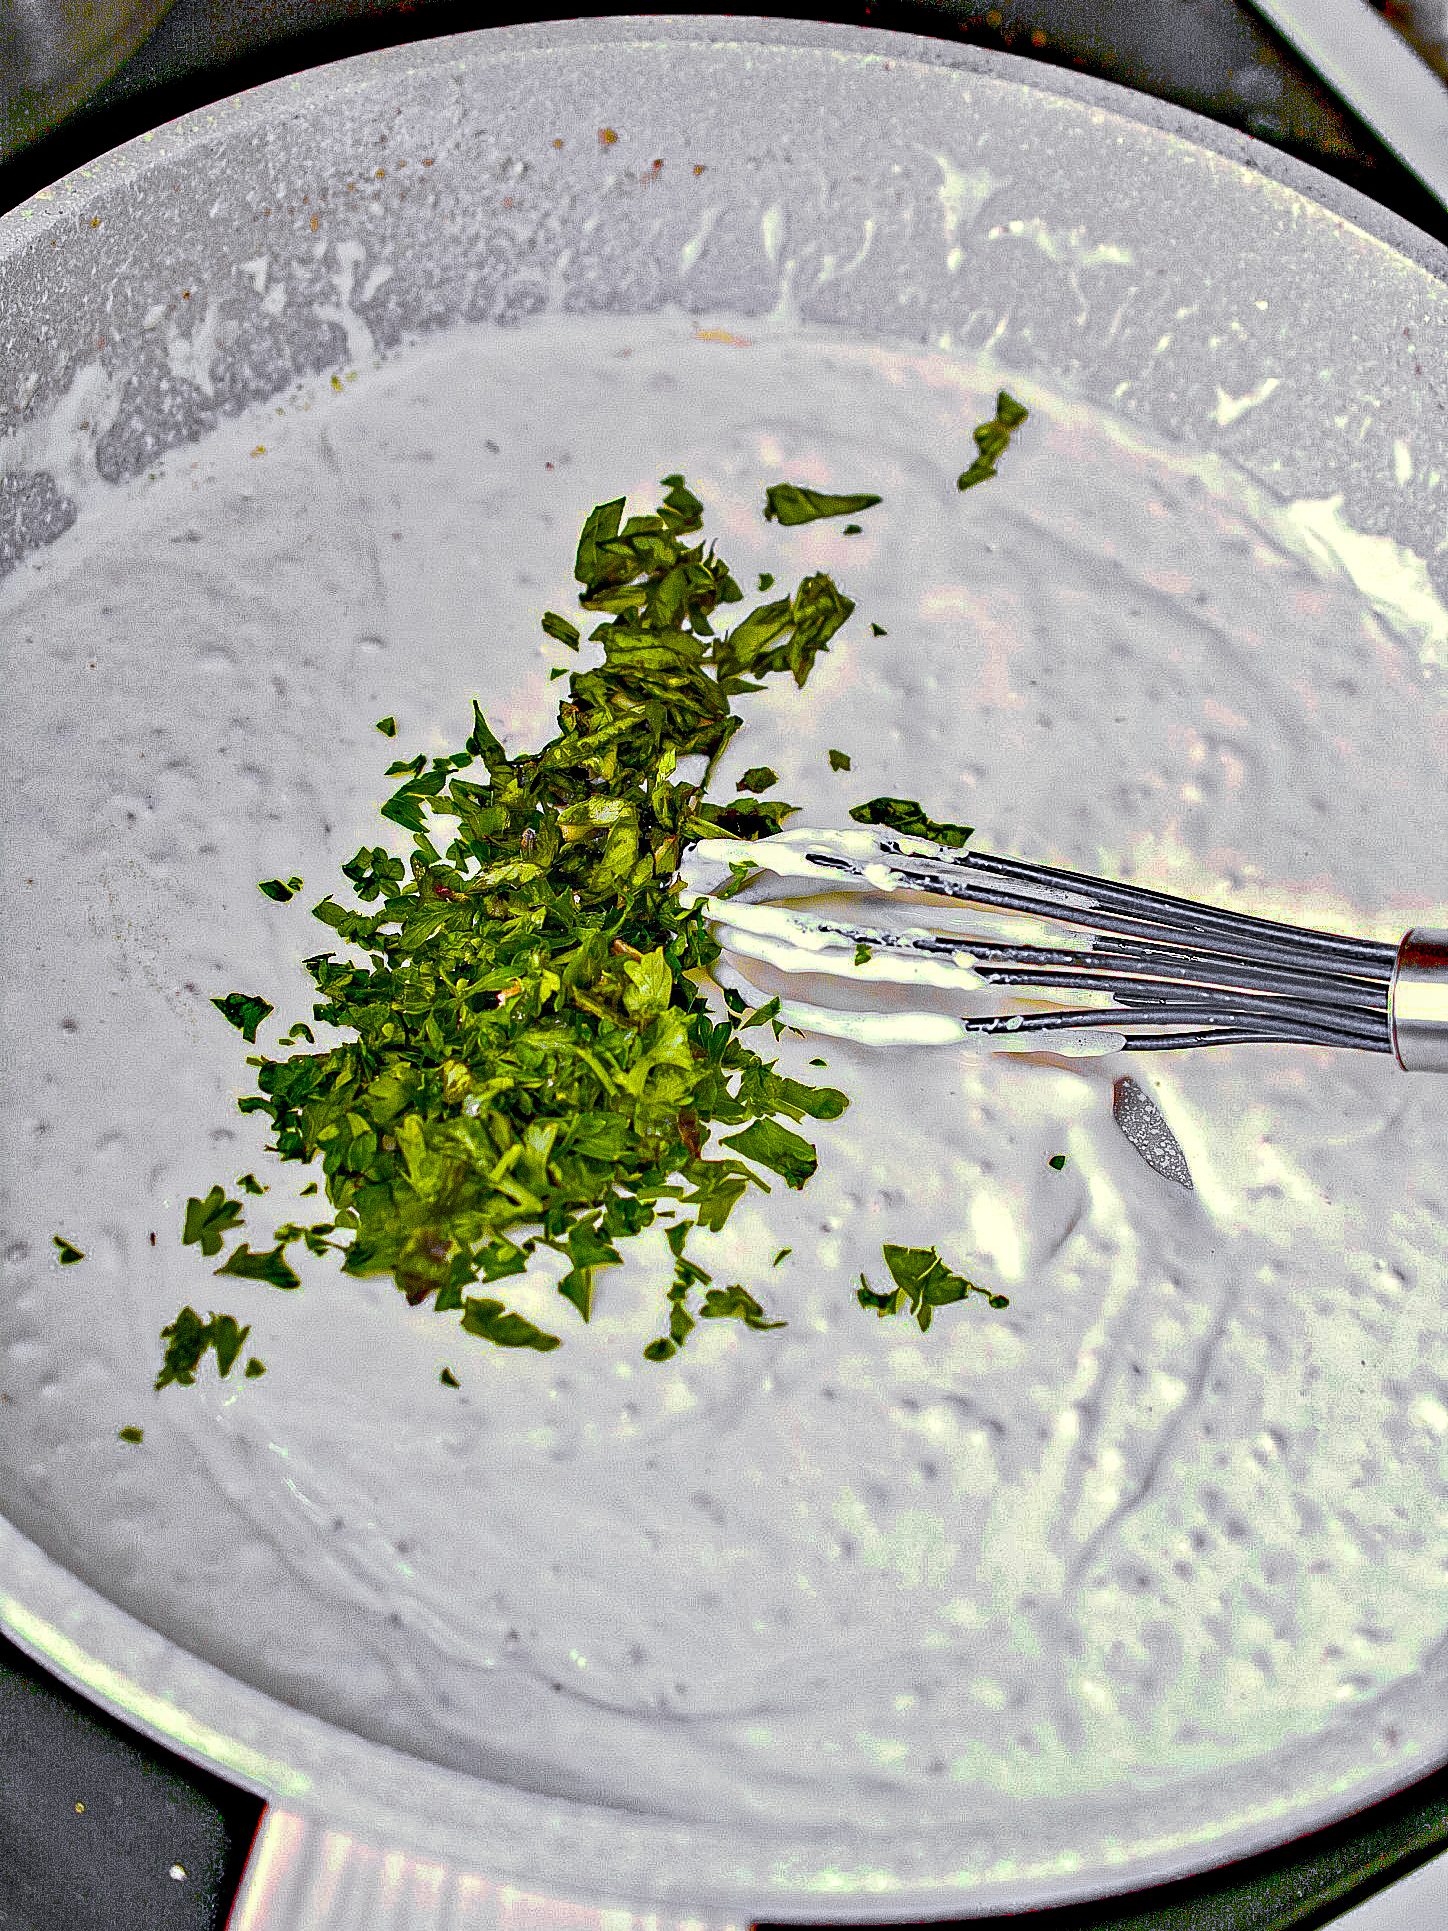 Whisk in the heavy whipping cream, salt, and pepper to taste, basil, and parsley. Cook until the mixture has thickened and is completely combined.